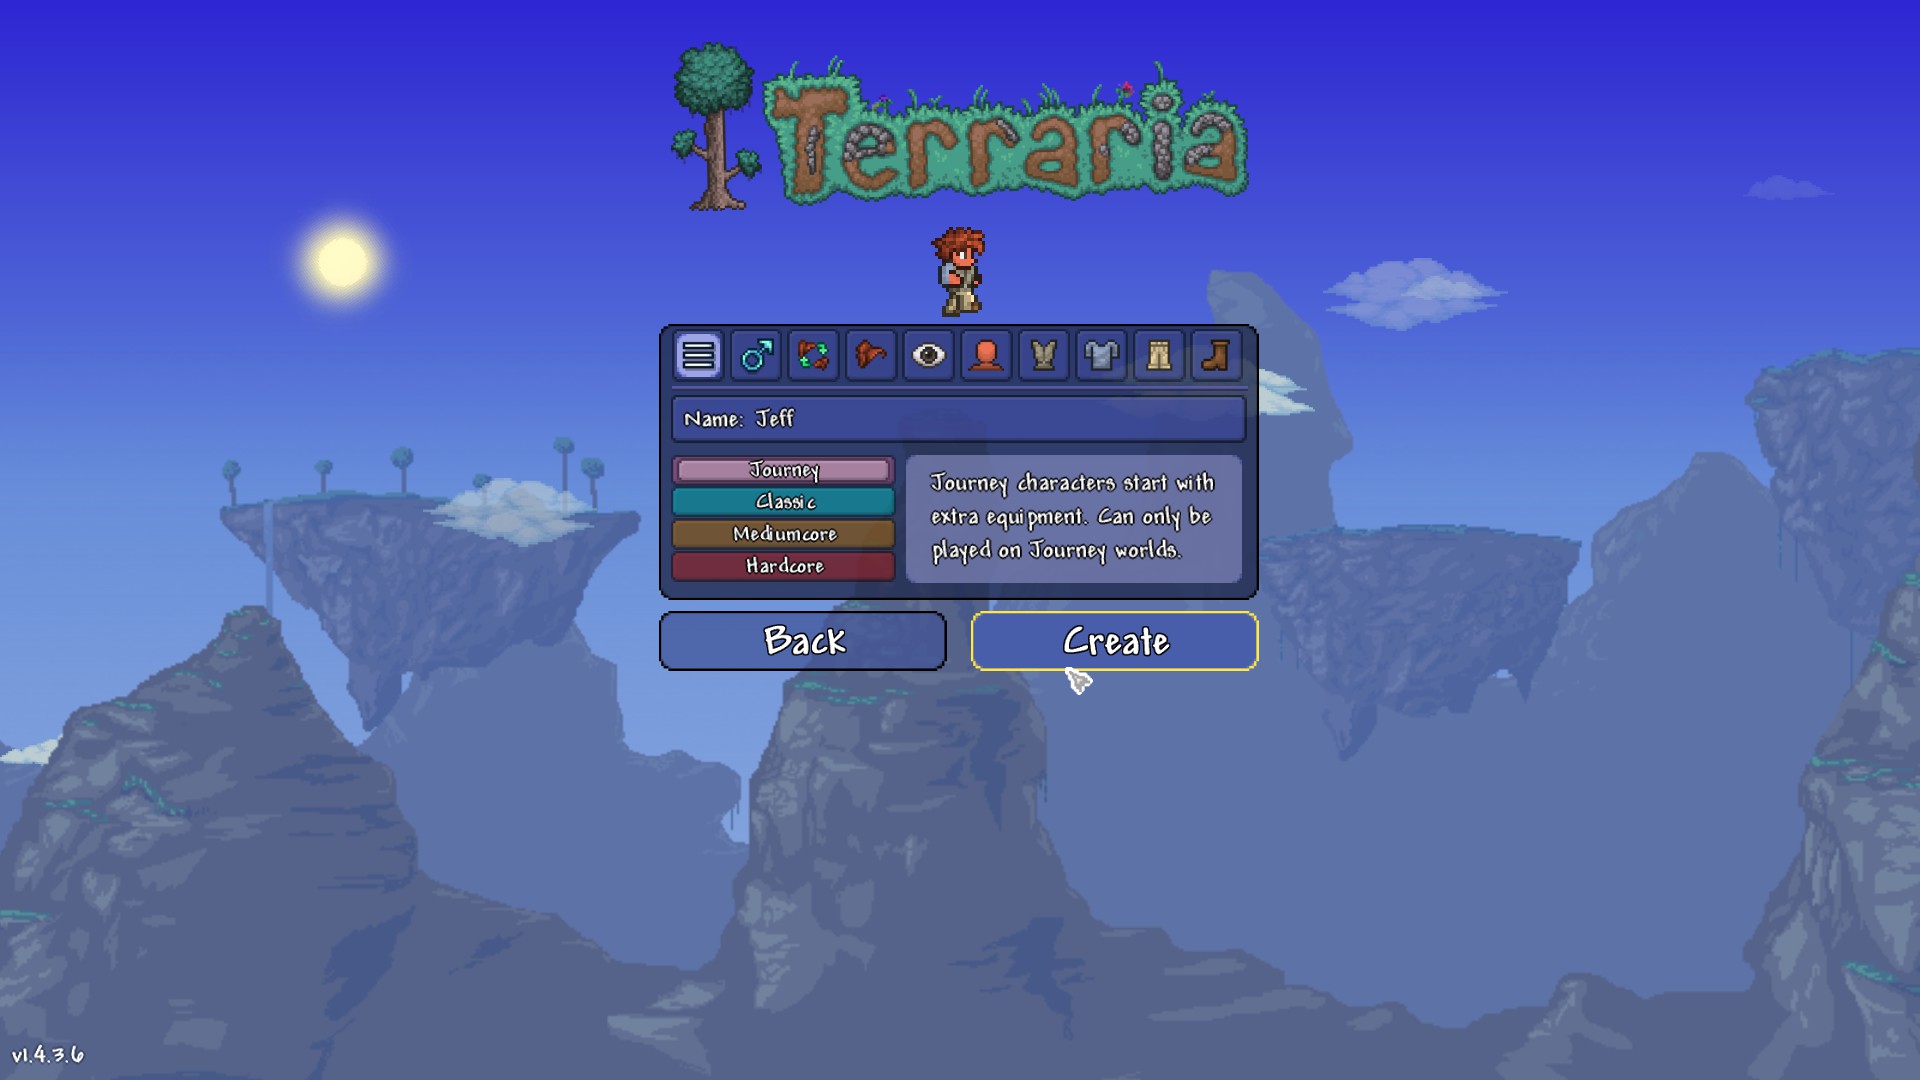 Terraria How to Get Copper Shortsword in Terraria Guide - Step 2: Character Create - DF70CDC